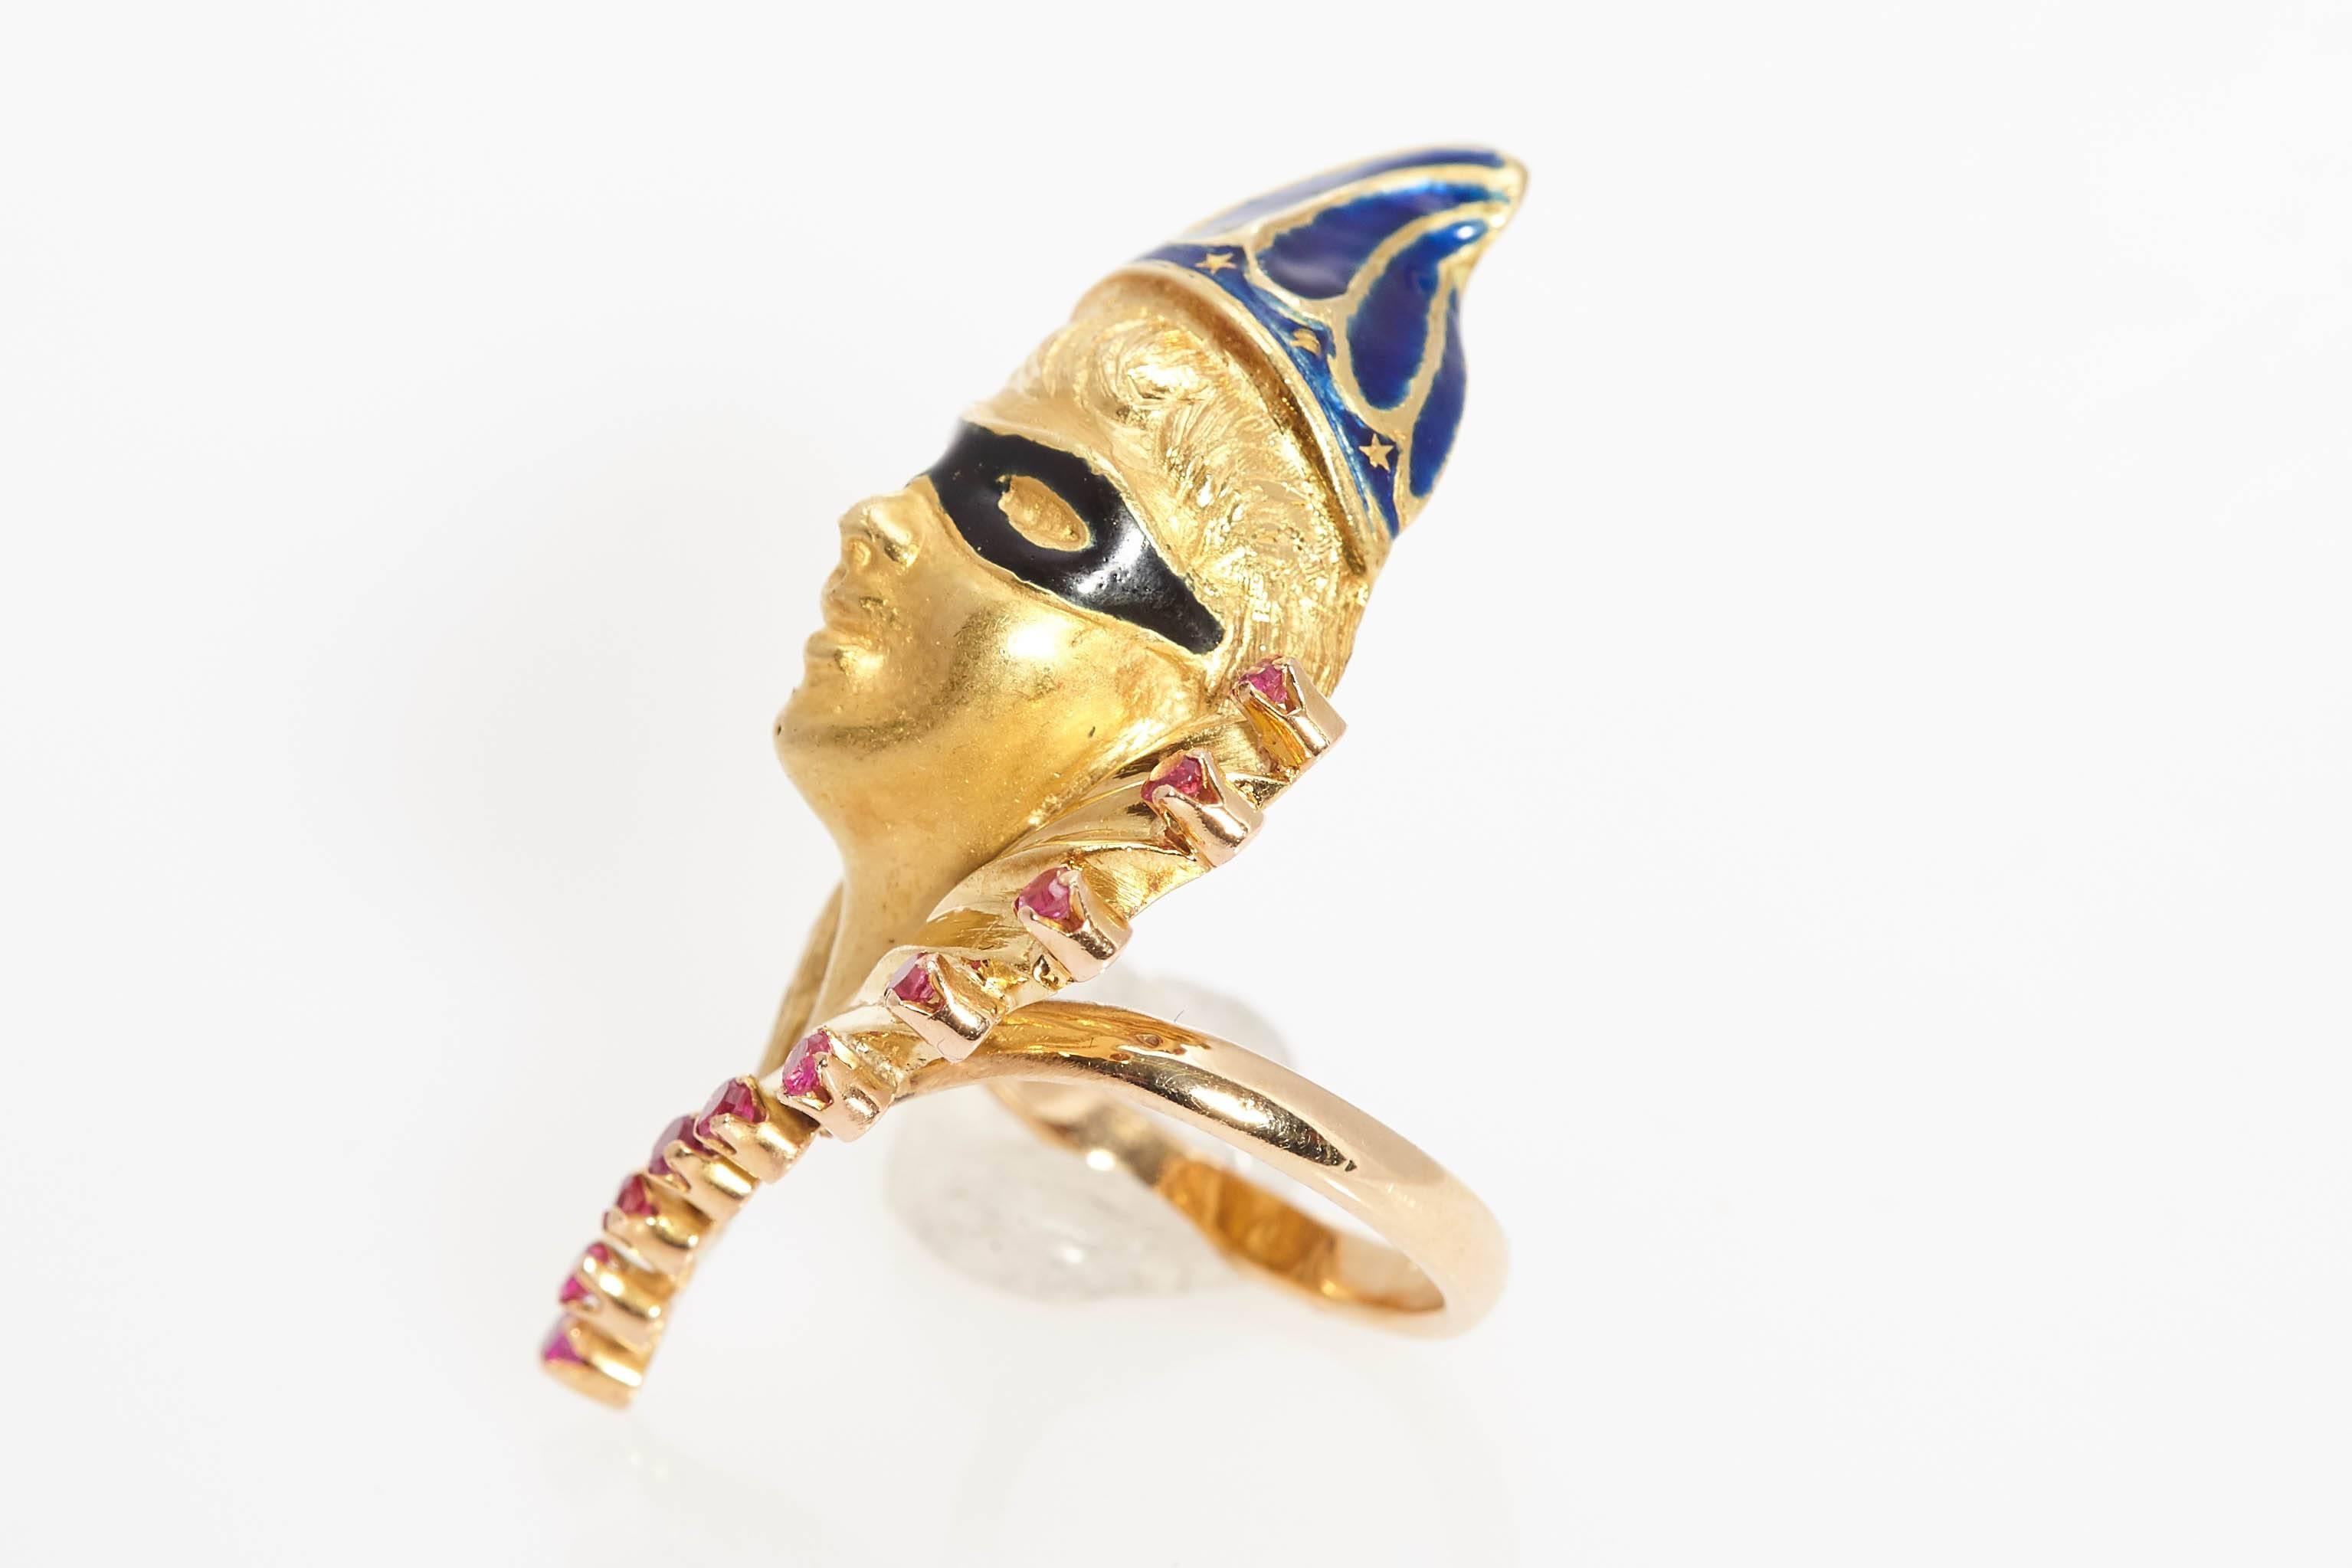 A peculiar Venetian Mask ring, representing Arlequin, in 18kt yellow gold, rubies and blue and black enamel. Made in Italy, circa 1970. 